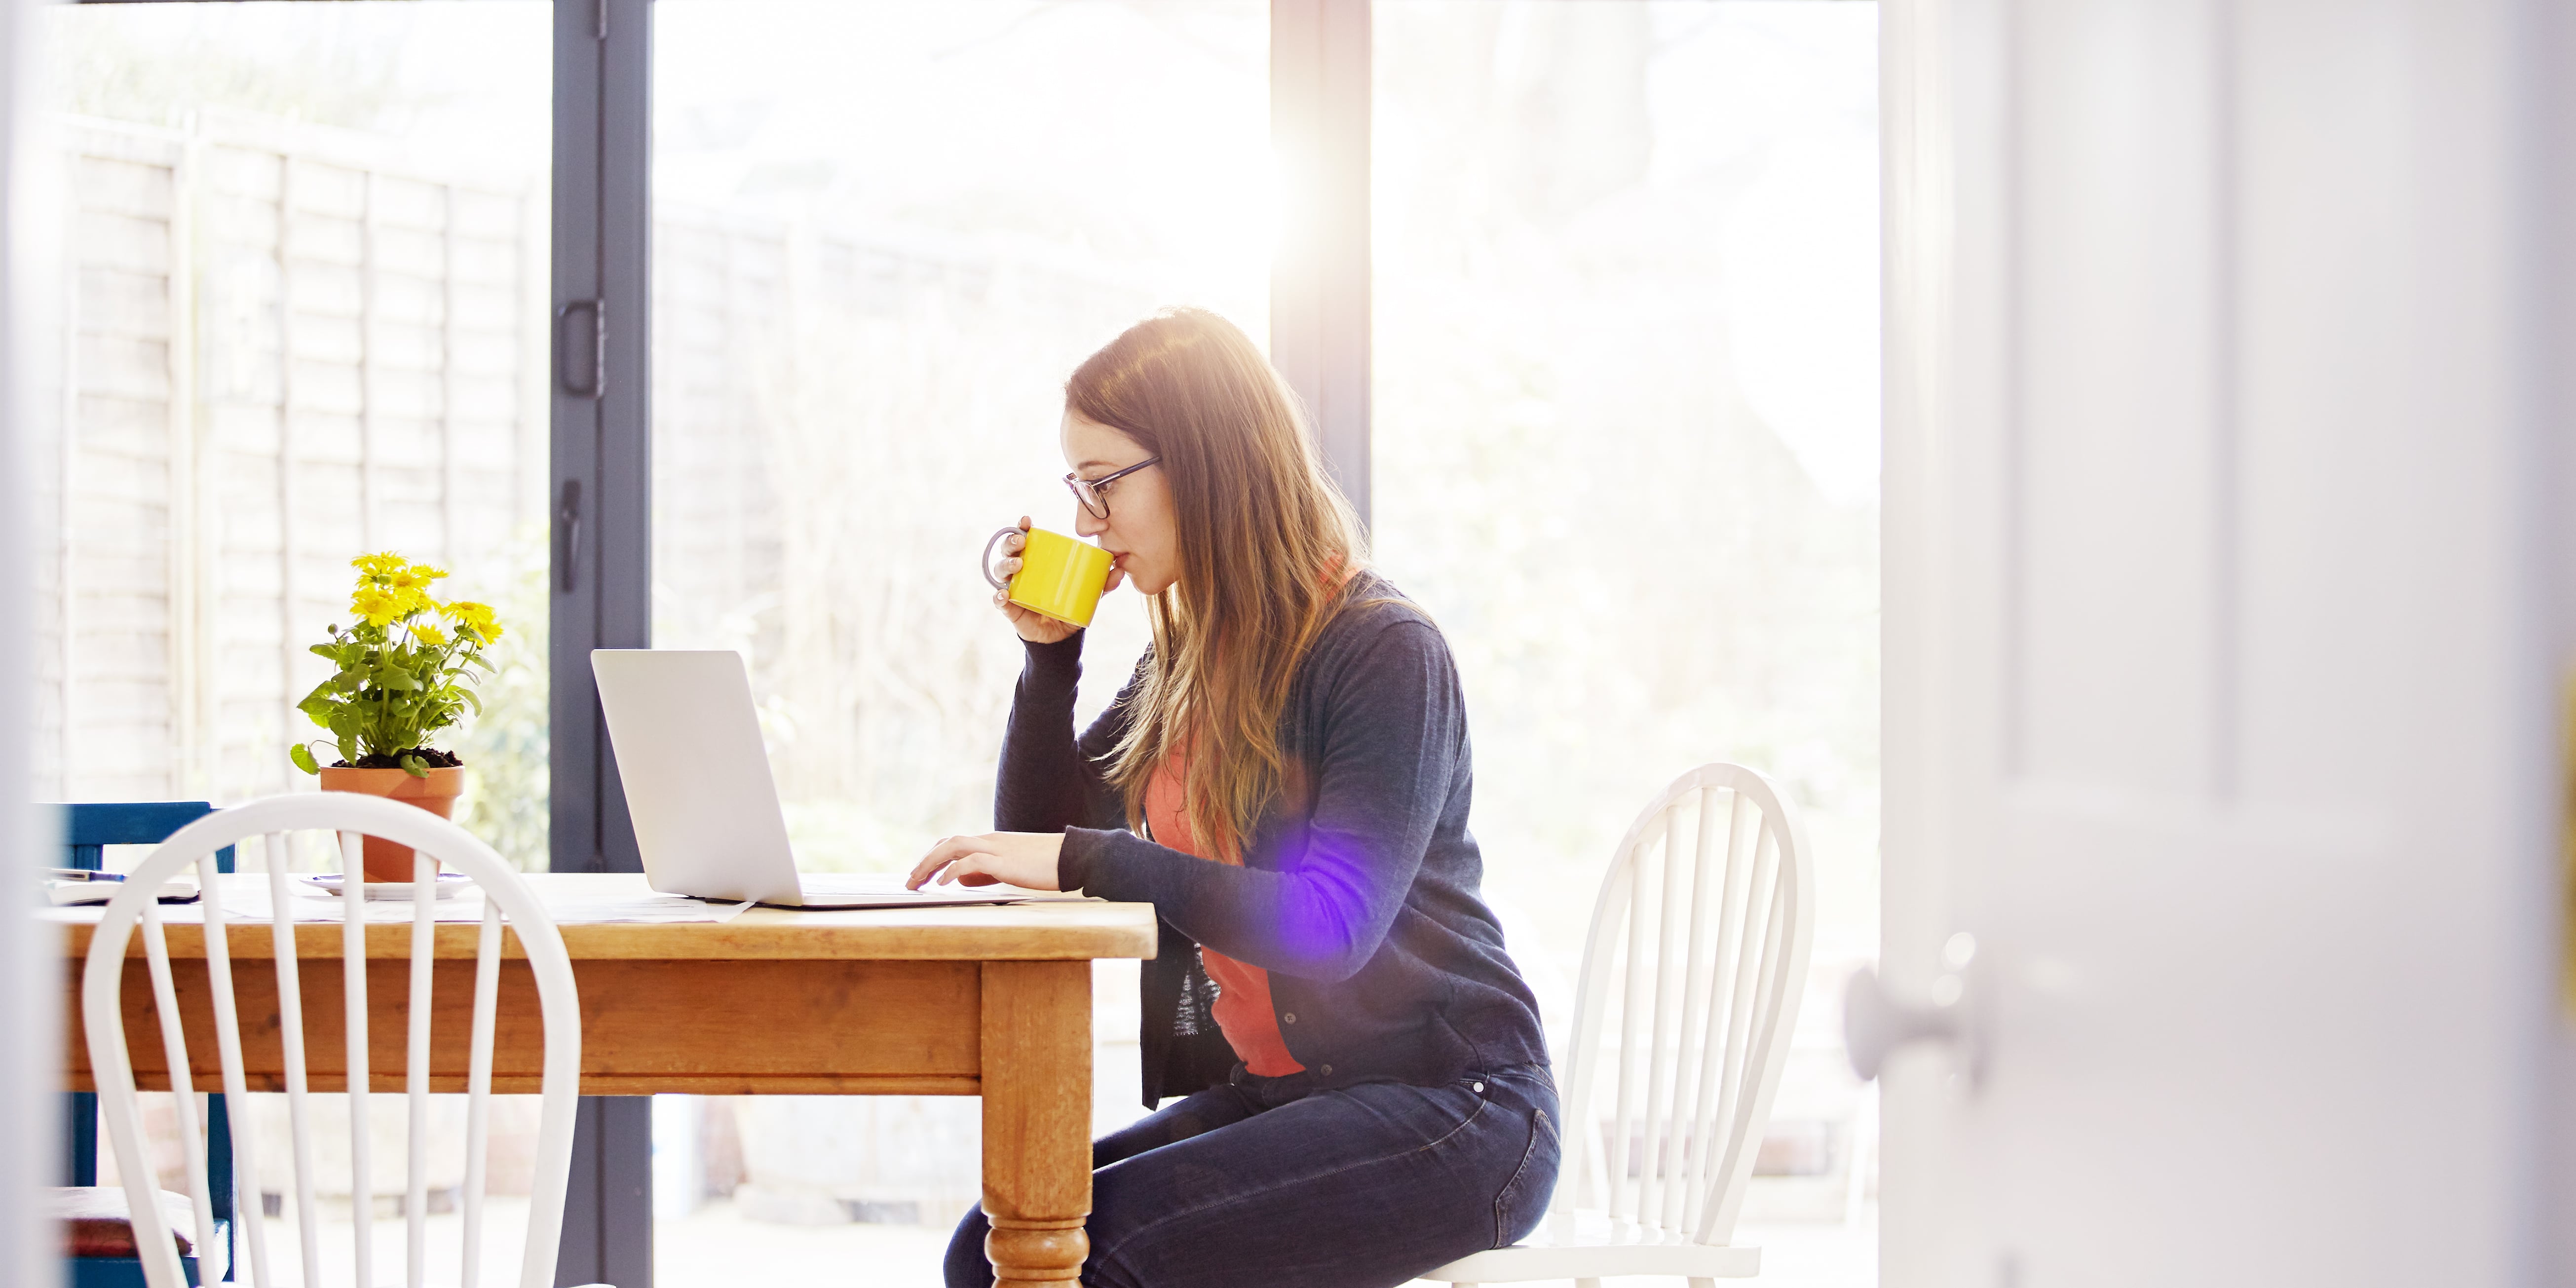 How to Focus While Working From Home and How to Find Remote Jobs